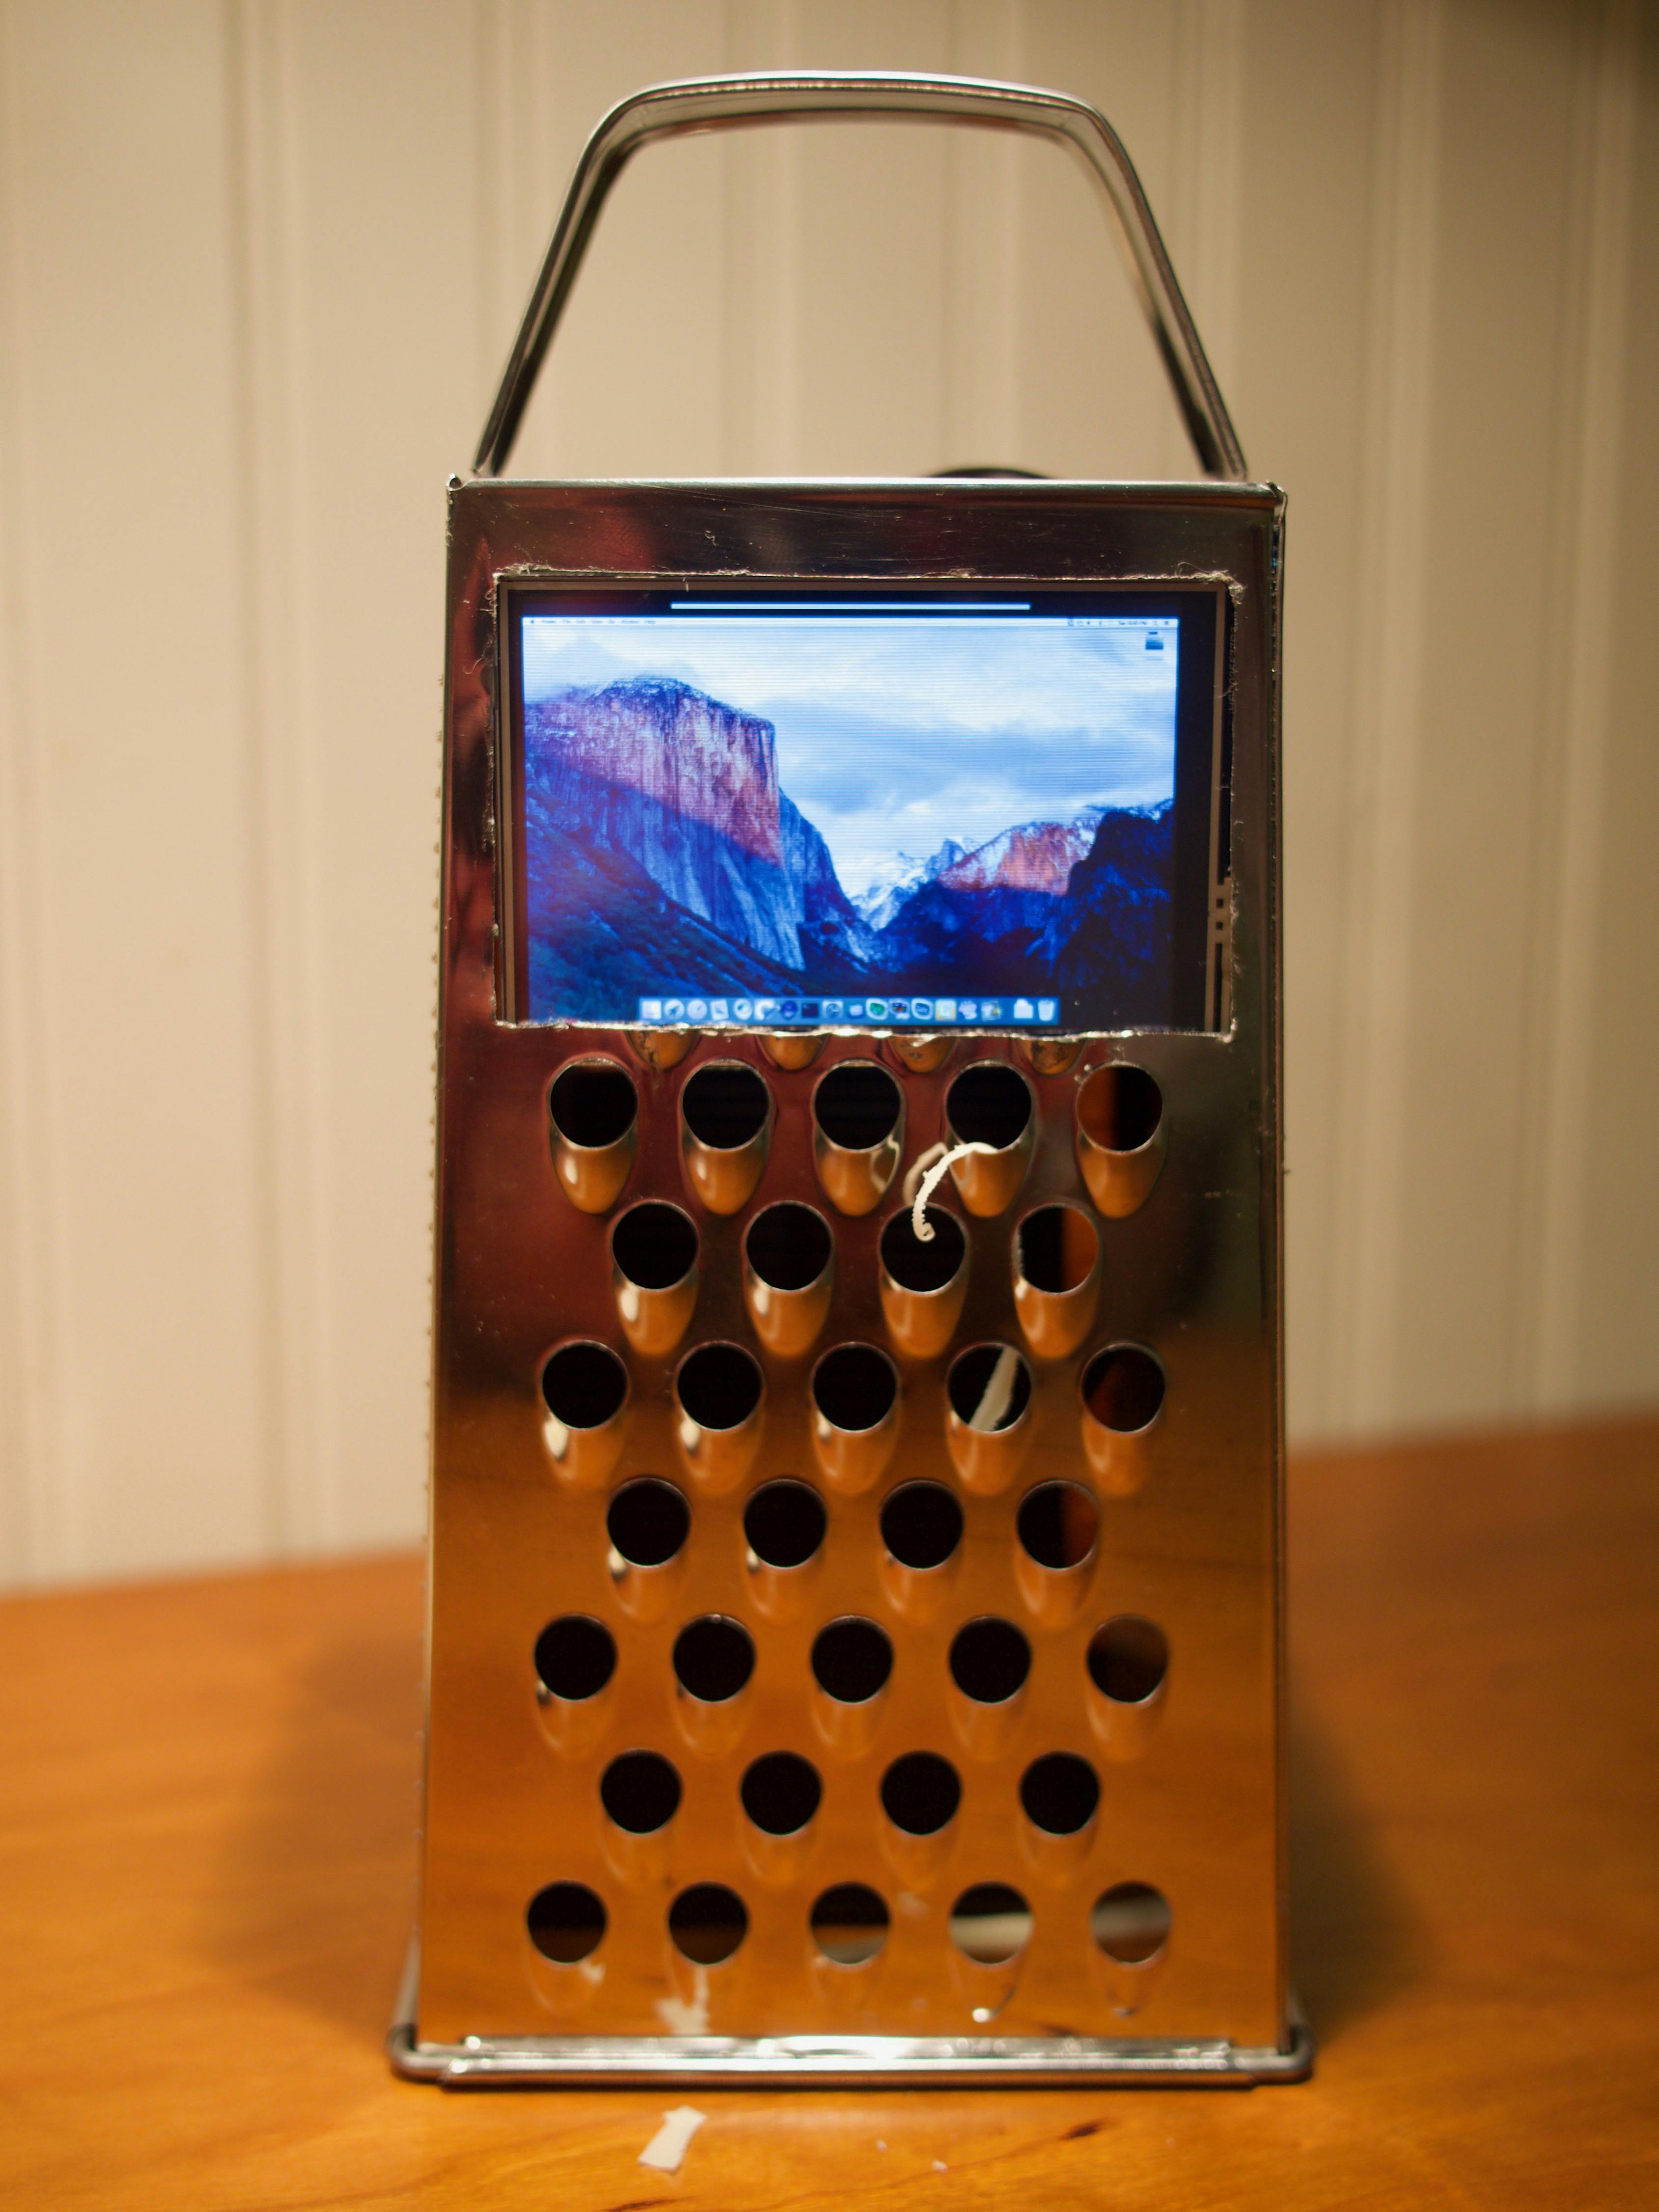 Apple Researching Mac Pro's 'Cheese Grater' Design for Other Devices Like  iPhone - MacRumors